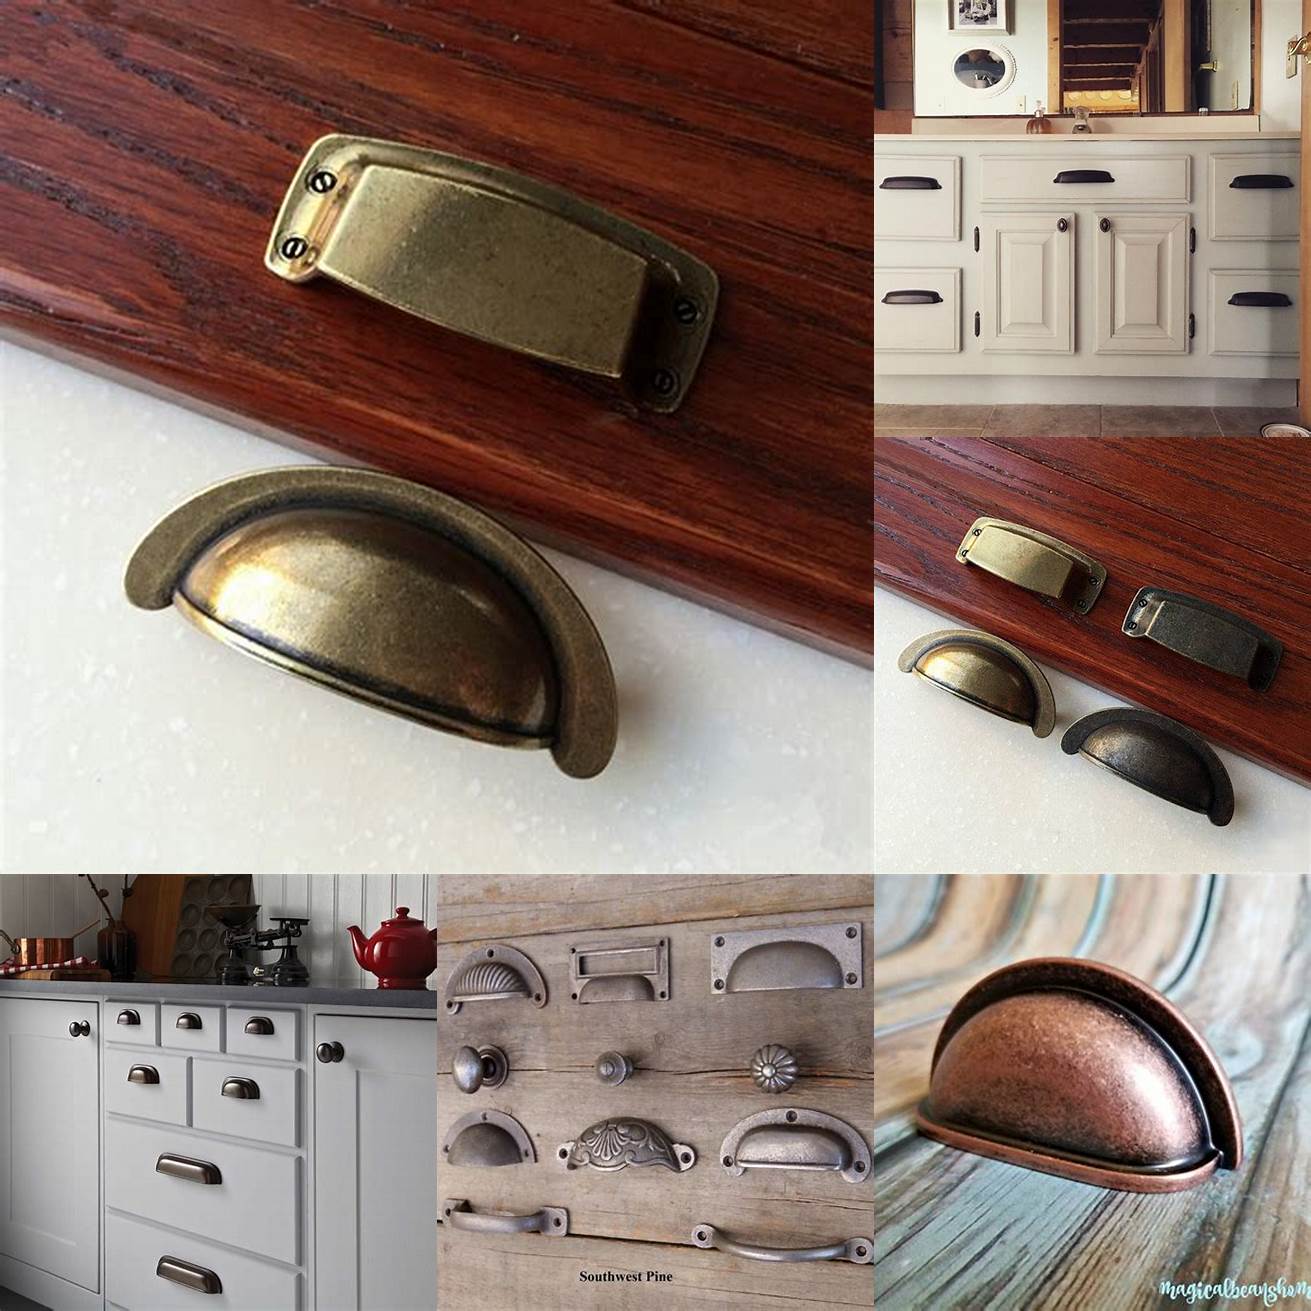 Cup Pulls For a vintage or farmhouse feel cup pulls on wooden cabinets can add a charming touch These are also great for those who want a larger grip